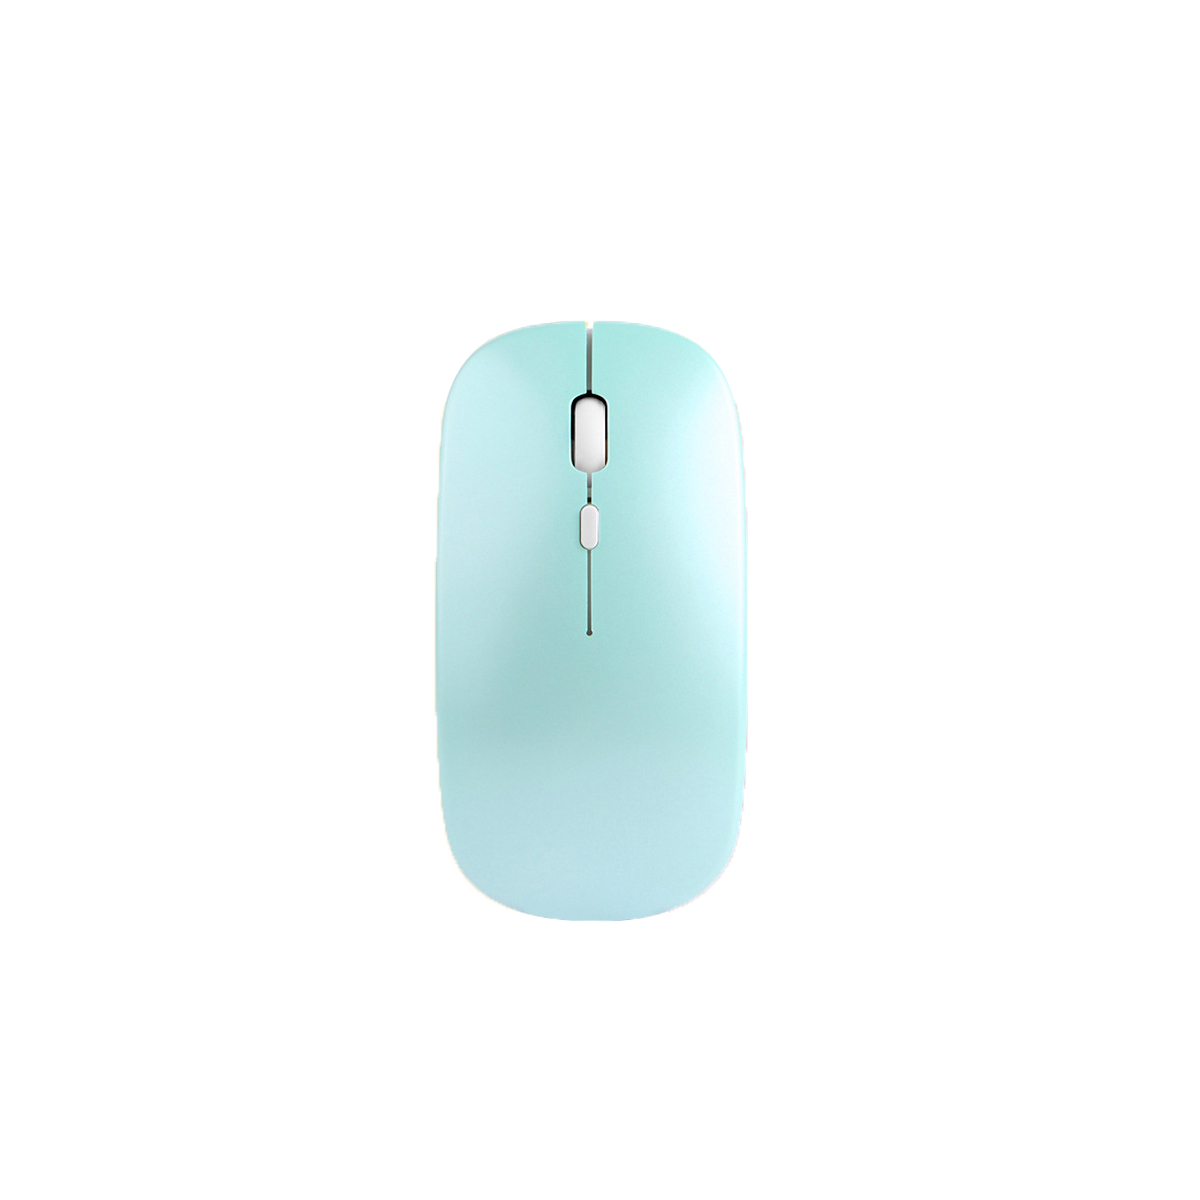 Find Dual Mode Rechargeable Mouse 2 4GHz Wired 1600DPI Silent Macarone Mute Mice for Laptop PC for Sale on Gipsybee.com with cryptocurrencies